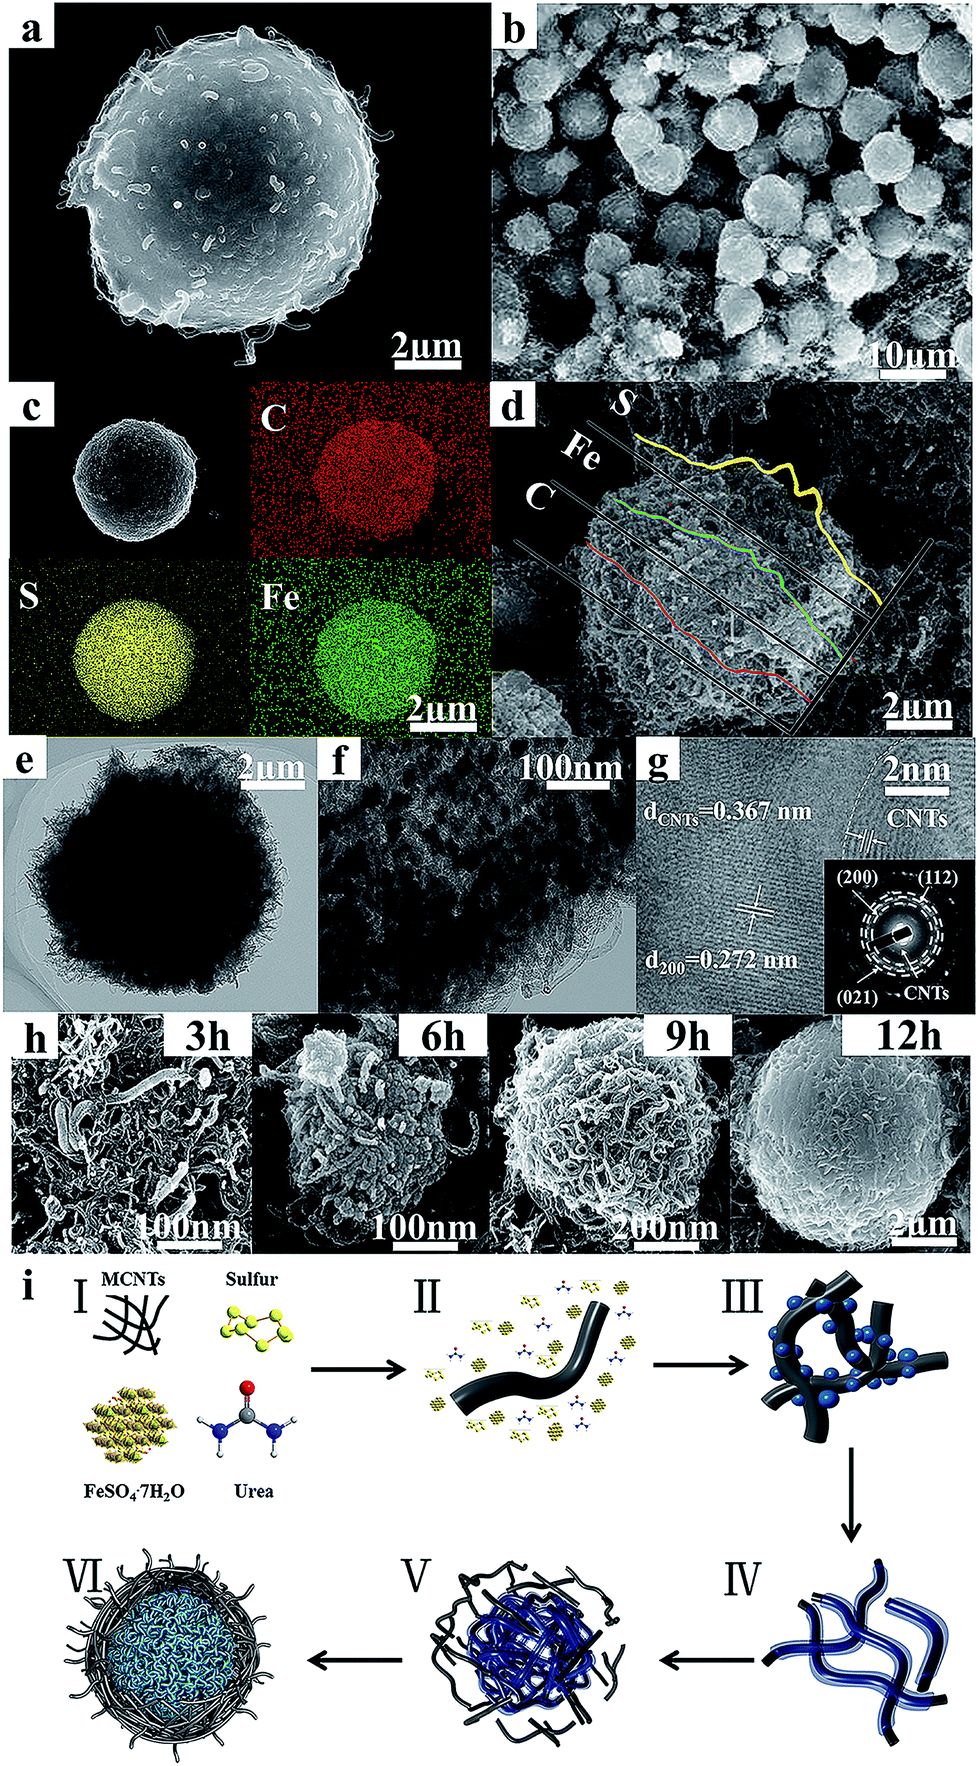 Adapting Fes 2 Micron Particles As An Electrode Material For Lithium Ion Batteries Via Simultaneous Construction Of Cnt Internal Networks And External Journal Of Materials Chemistry A Rsc Publishing Doi 10 1039 C8tac